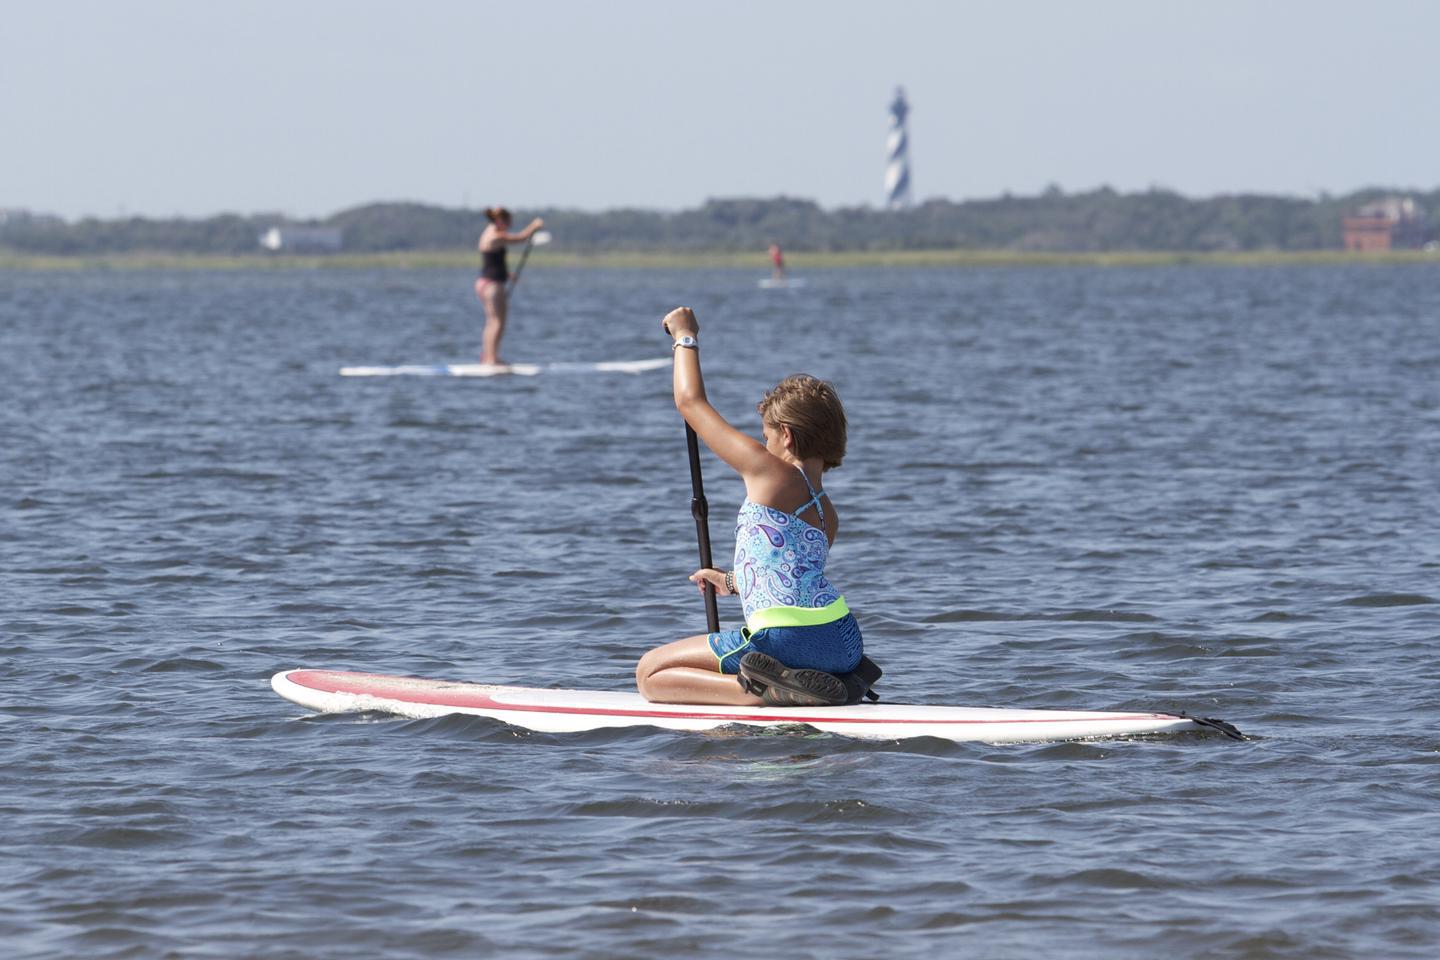 Paddling Pamlico SoundLots of recreation opportunities await visits on the sound side of the barrier islands.